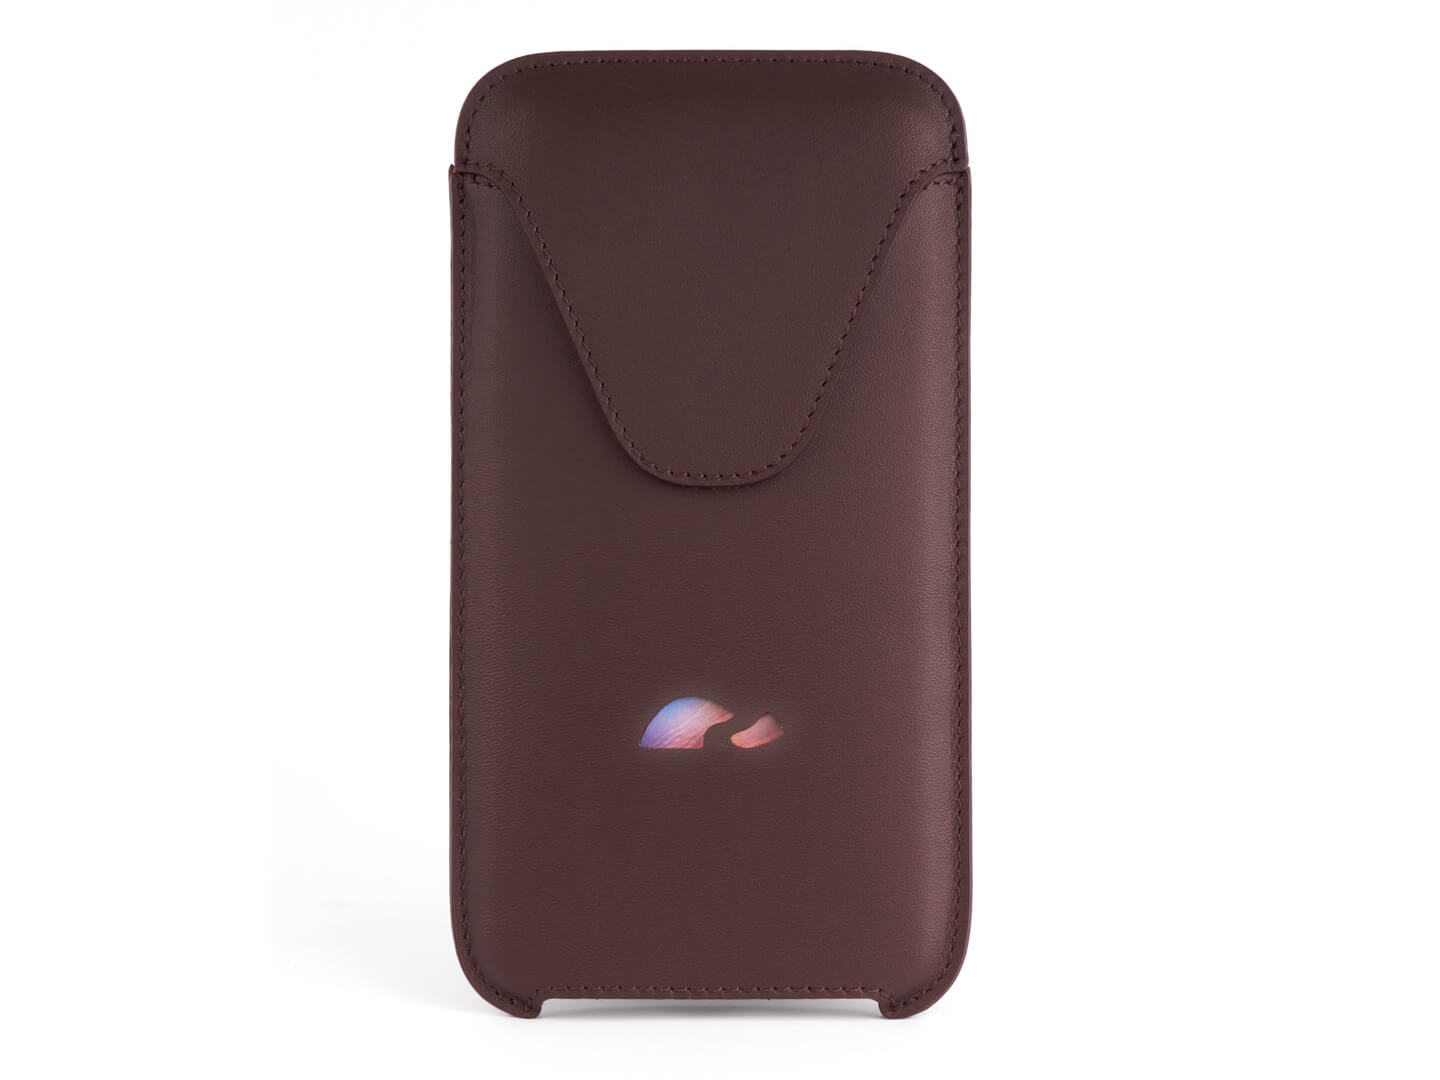 iPhone 6 / 7 / 8 / Plus Sleeve Case Leather slim - brown - Carapaz